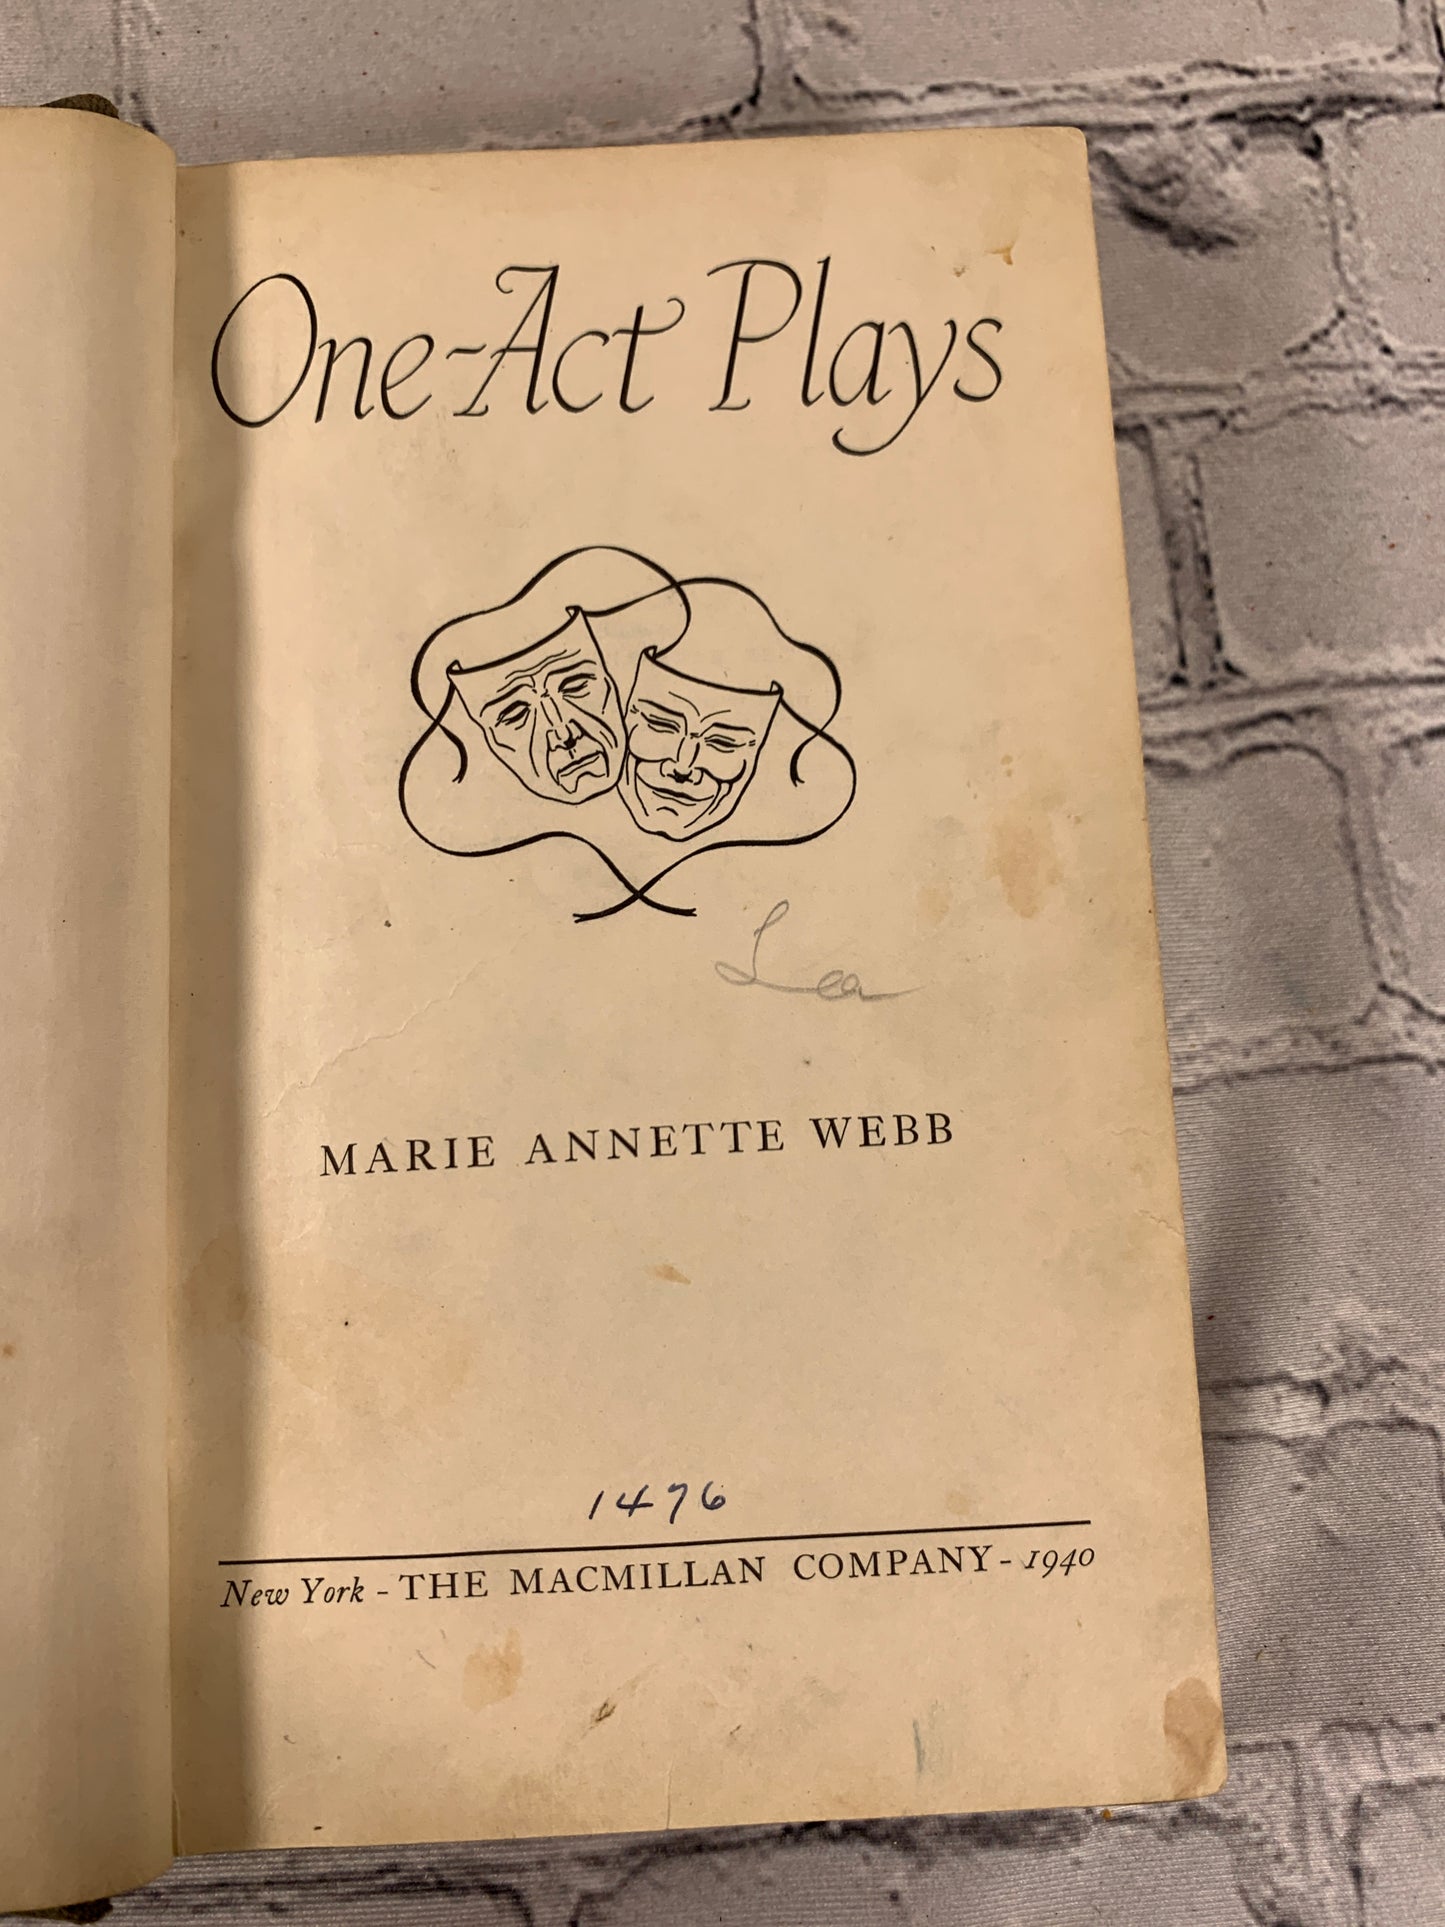 One Act Plays by Marie Annette Webb [1940]